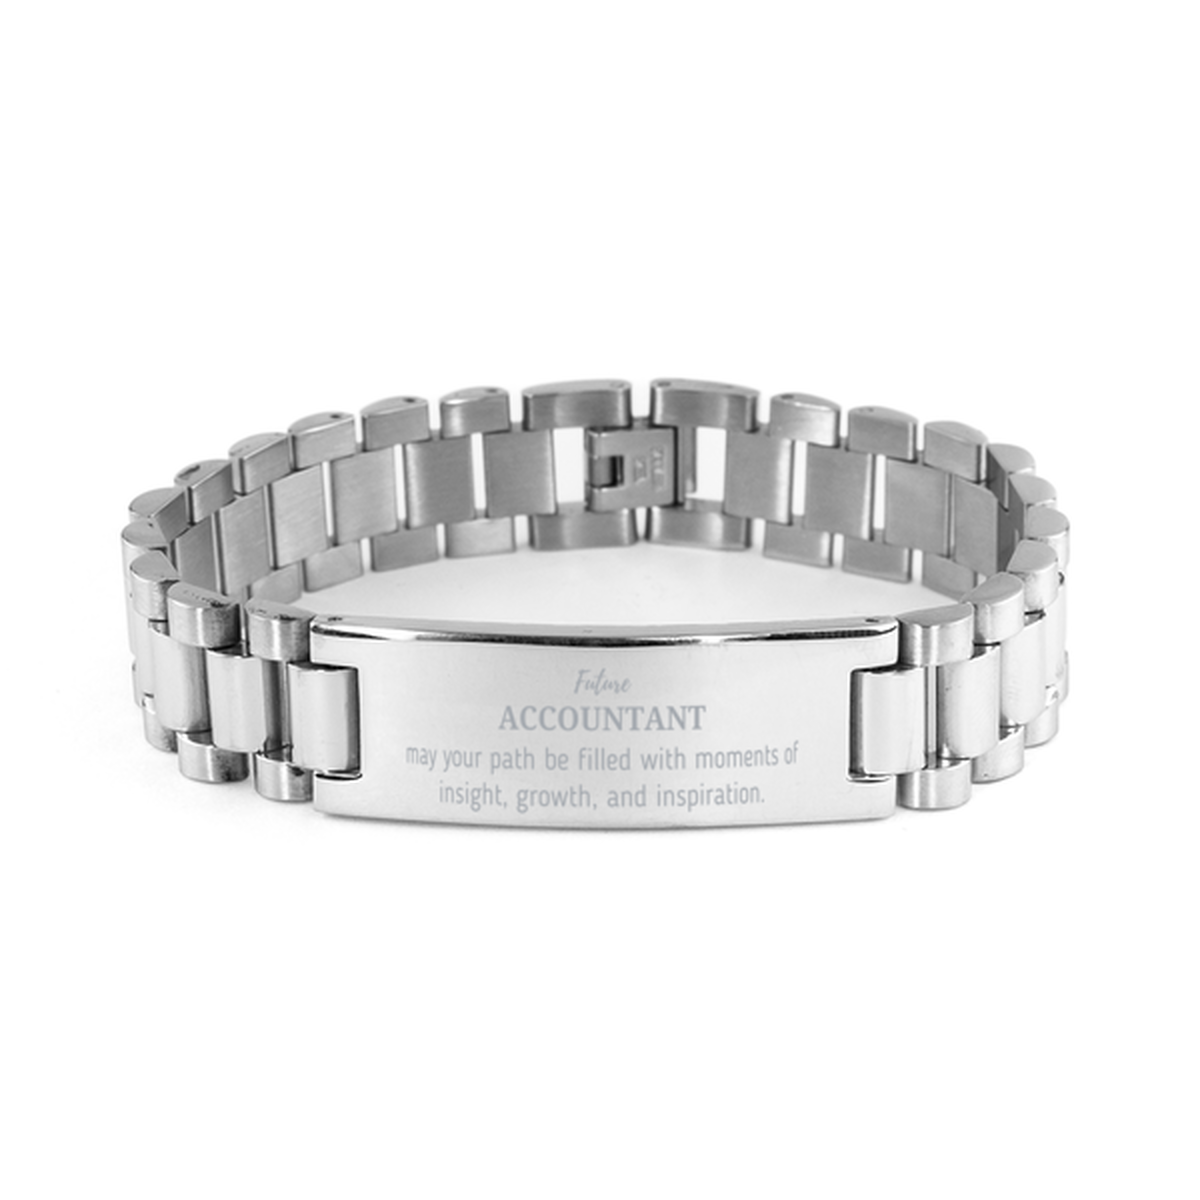 Future Accountant Gifts, May your path be filled with moments of insight, Graduation Gifts for New Accountant, Christmas Unique Ladder Stainless Steel Bracelet For Men, Women, Friends